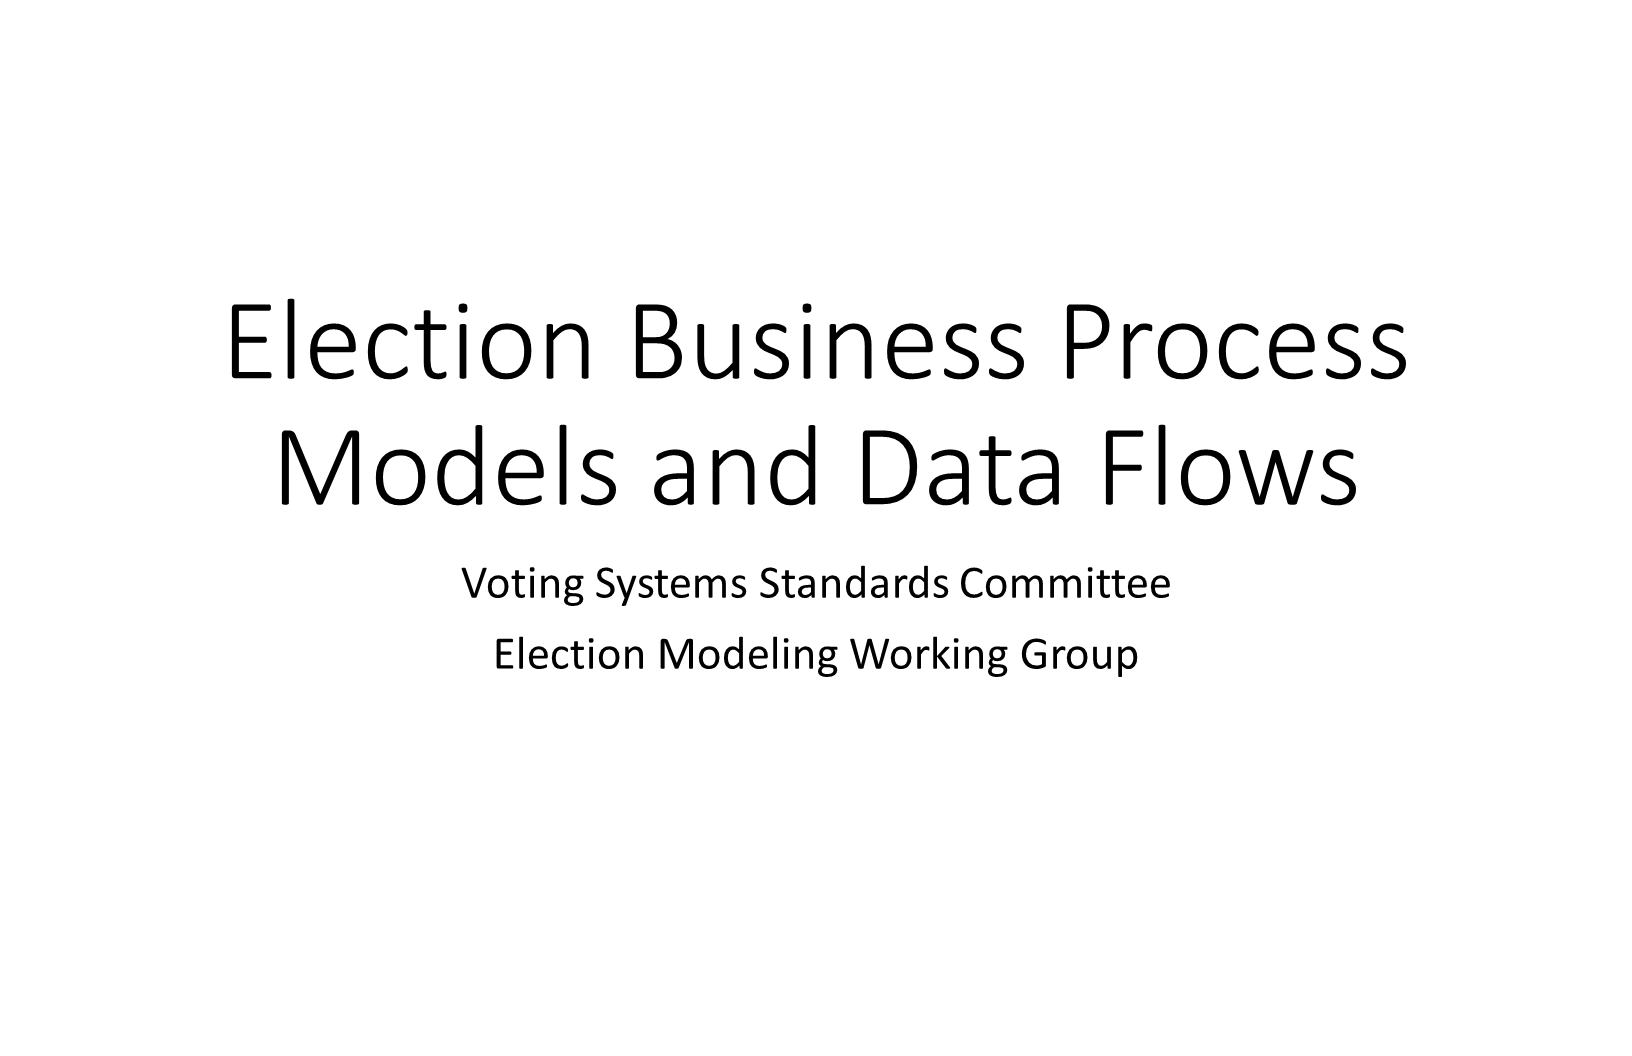 KB Process: Election Business Process Models and Data Flows